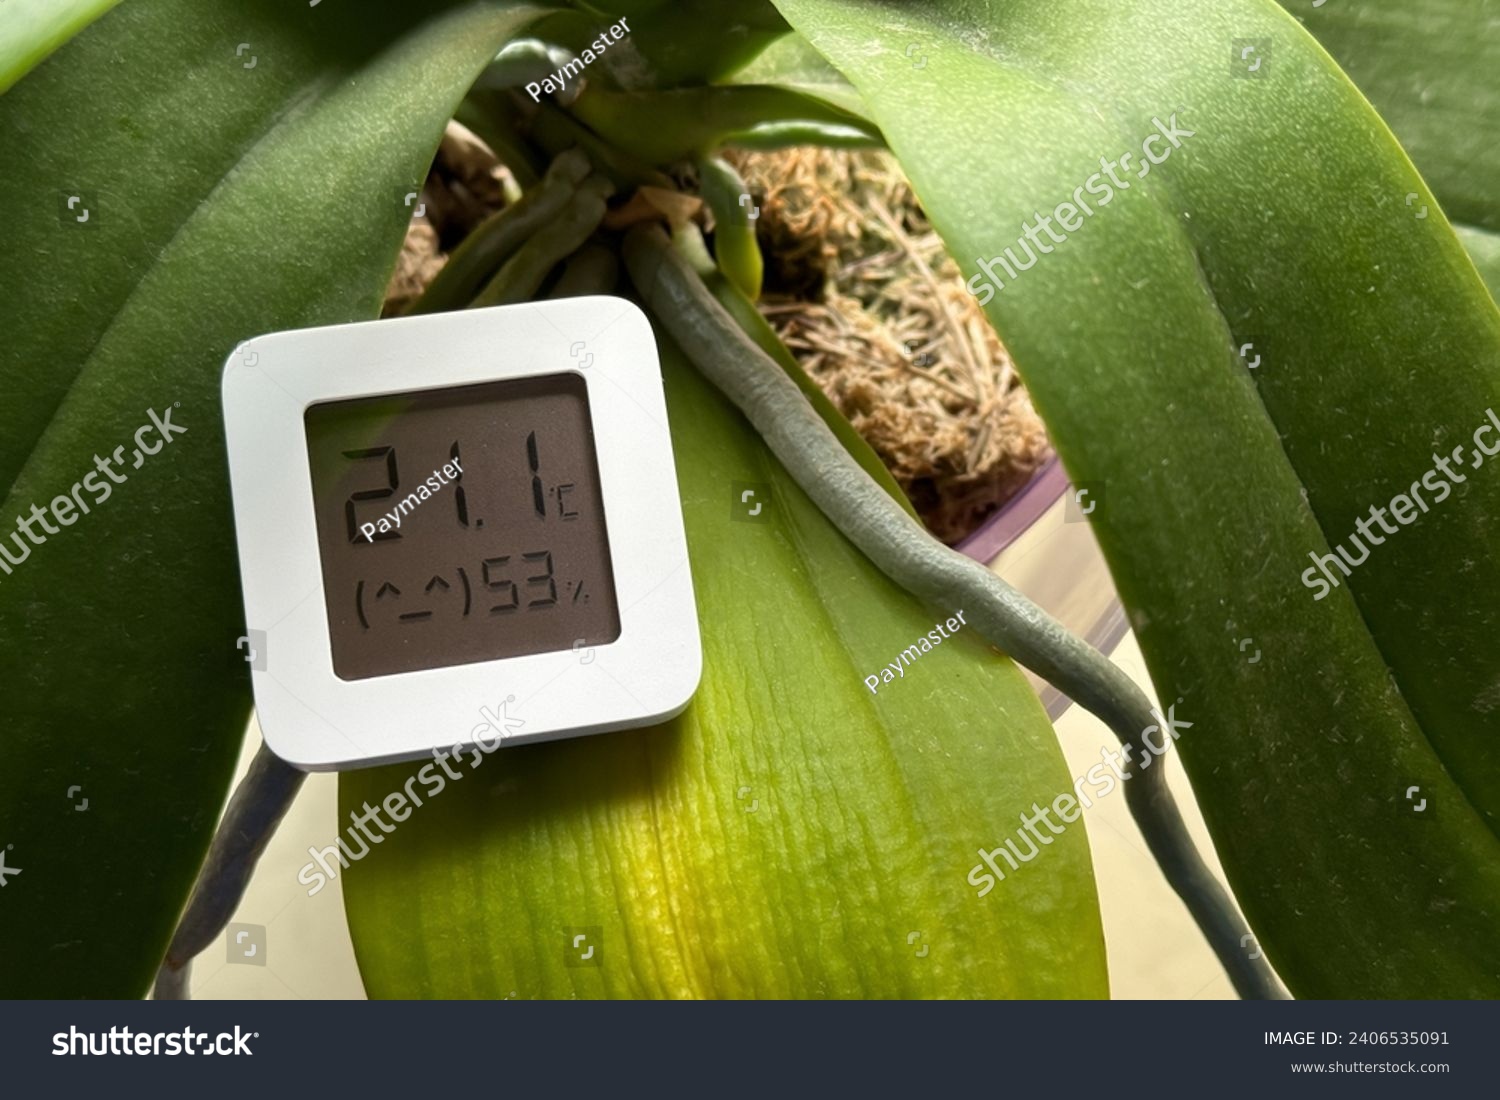 Hygrometer and orchid. The hygrometer displays humidity and temperature near the orchid flower. #2406535091